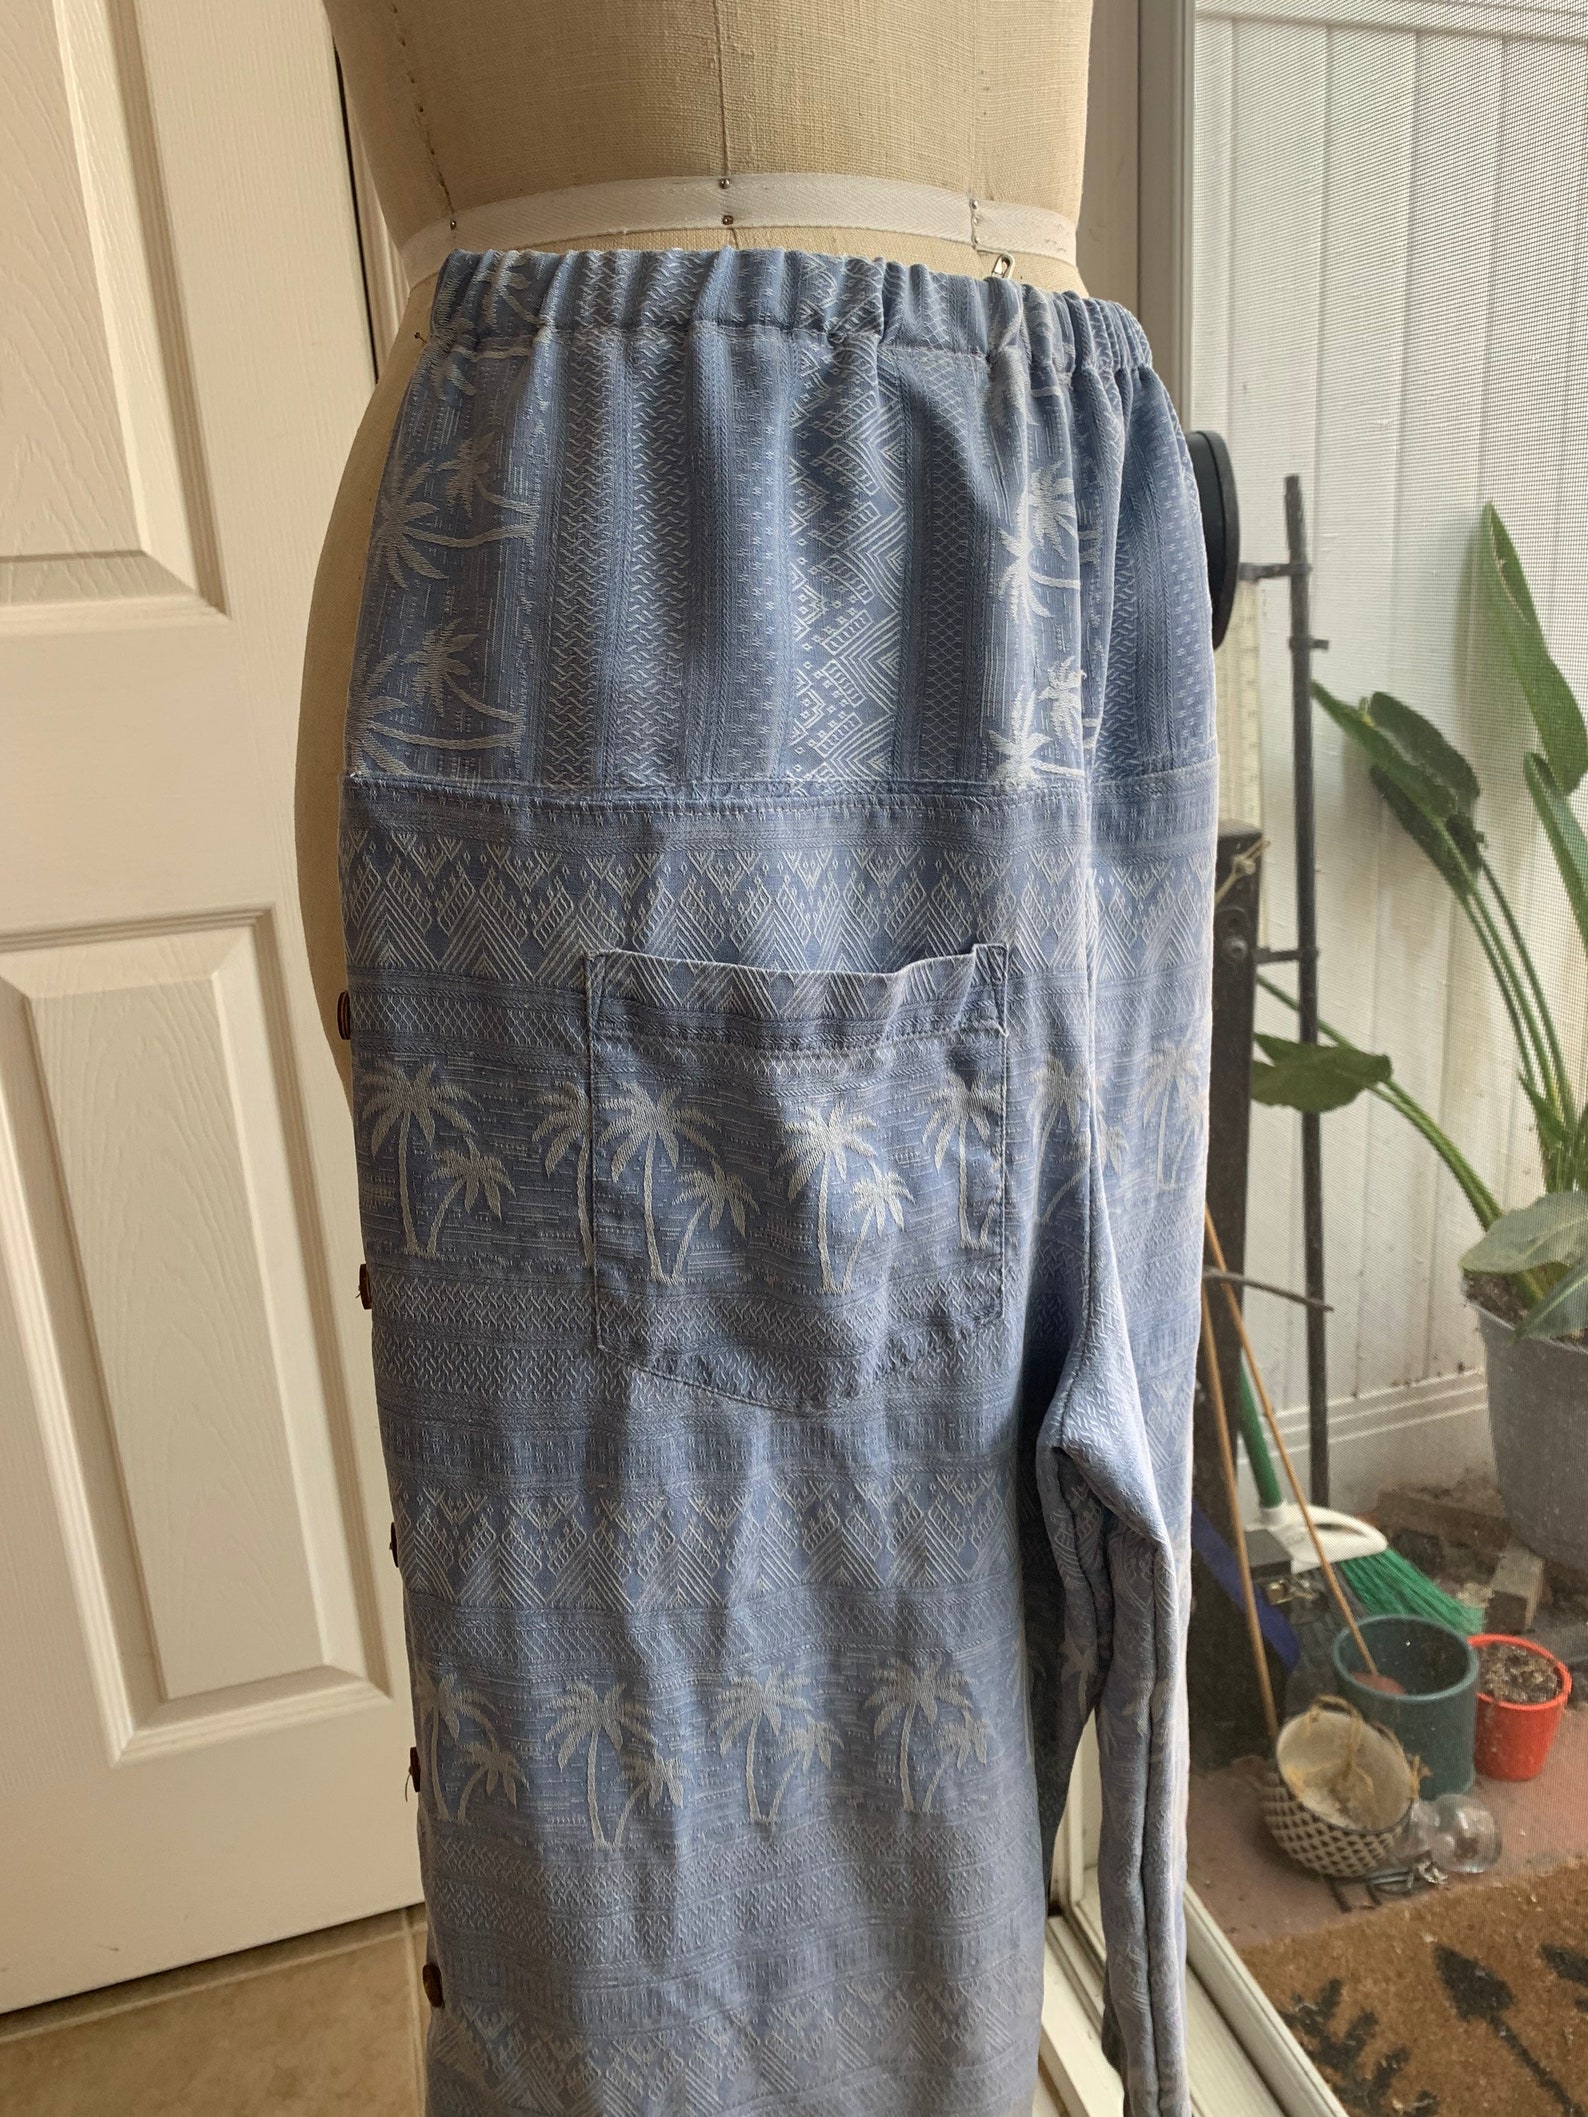 Silk Loose Fitting Pajama Pants in Pale Blue with Palm Trees | Etsy